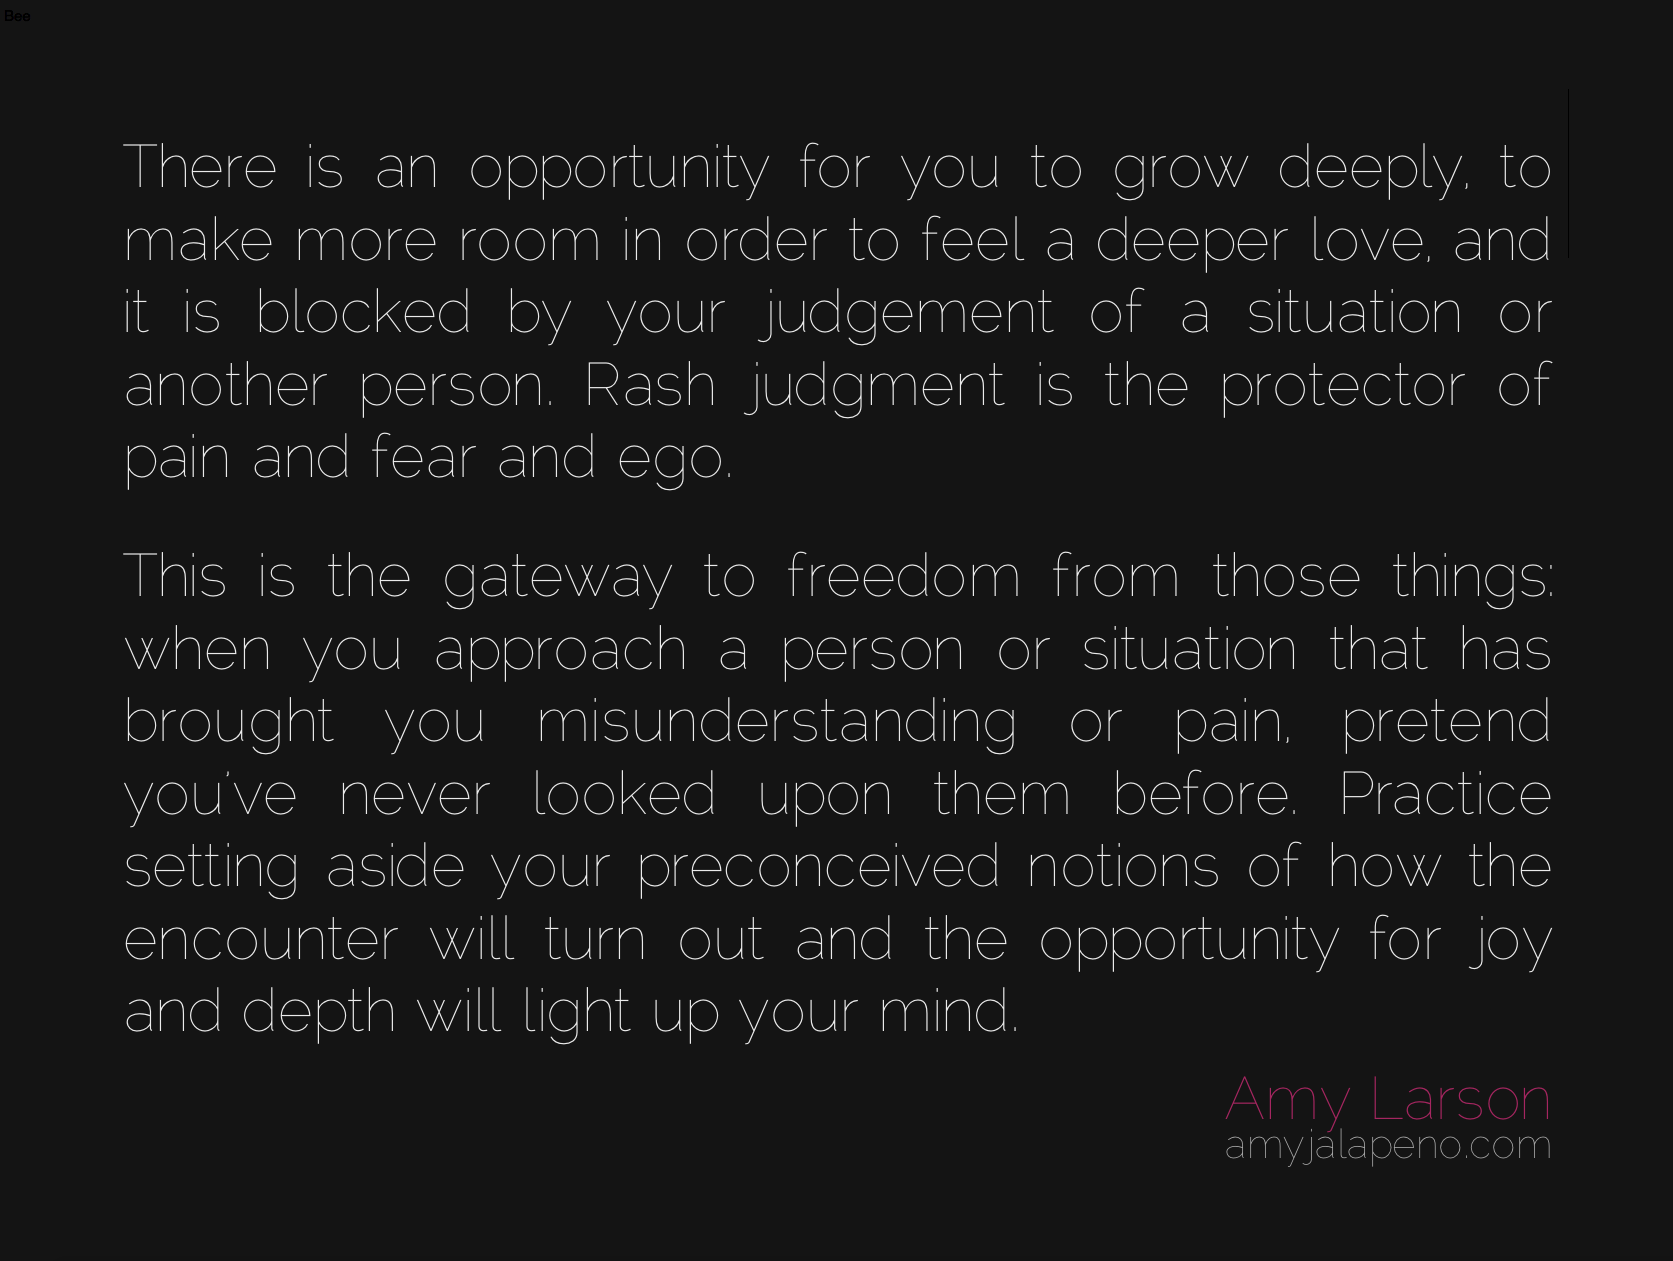 relationships opportunity love fear judgment ego pain joy